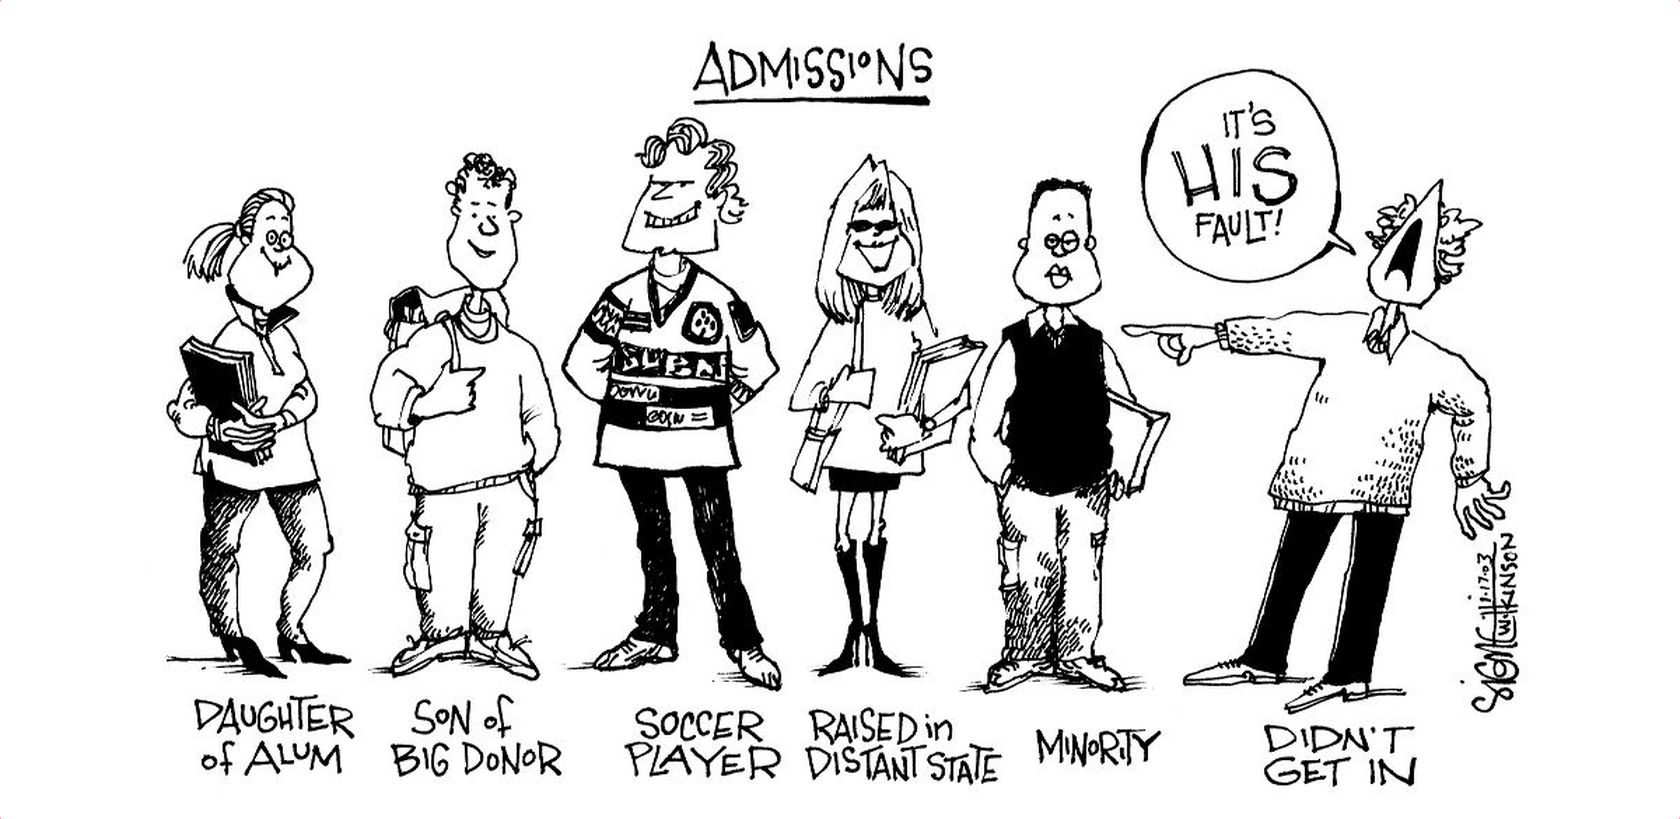 University Admissions Process by Signe Wilkinson